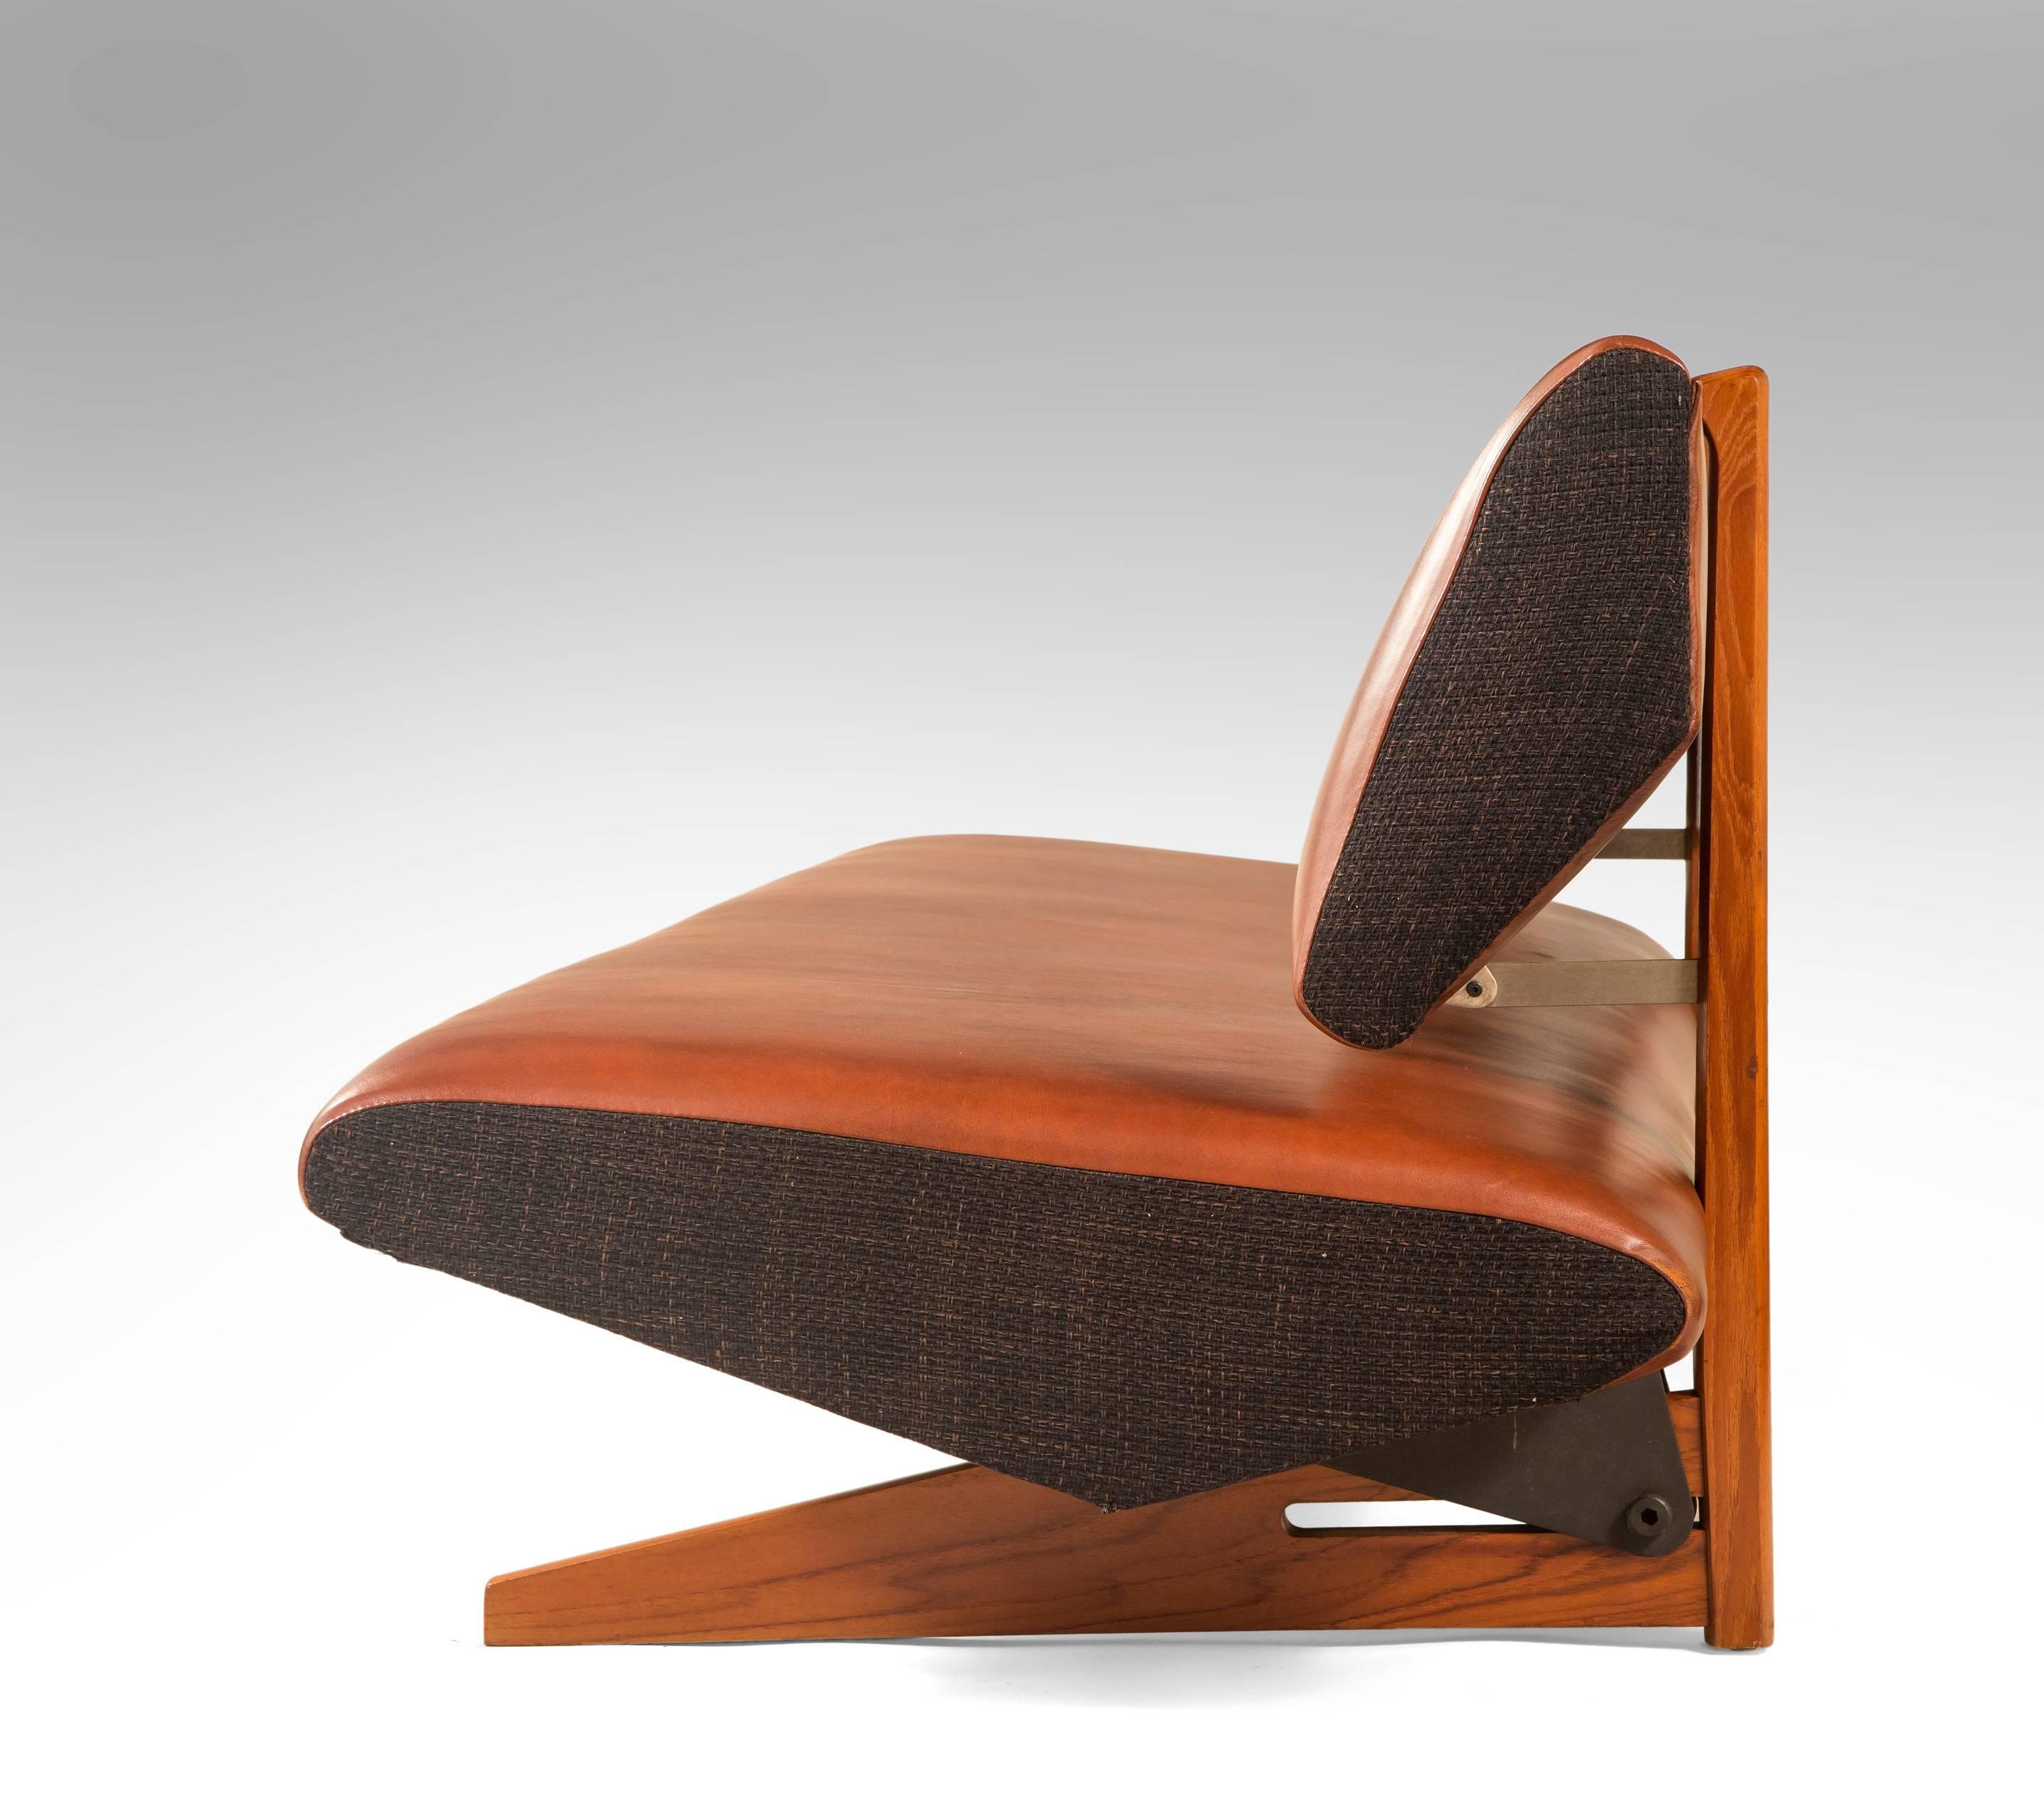 The triangular profiled backrest, floating on teak uprights, above a triangular profiled seat cushion, terminating in two elongated angular feet. Model 701.

The same model sofa is illustrated in Mobilia, 1961